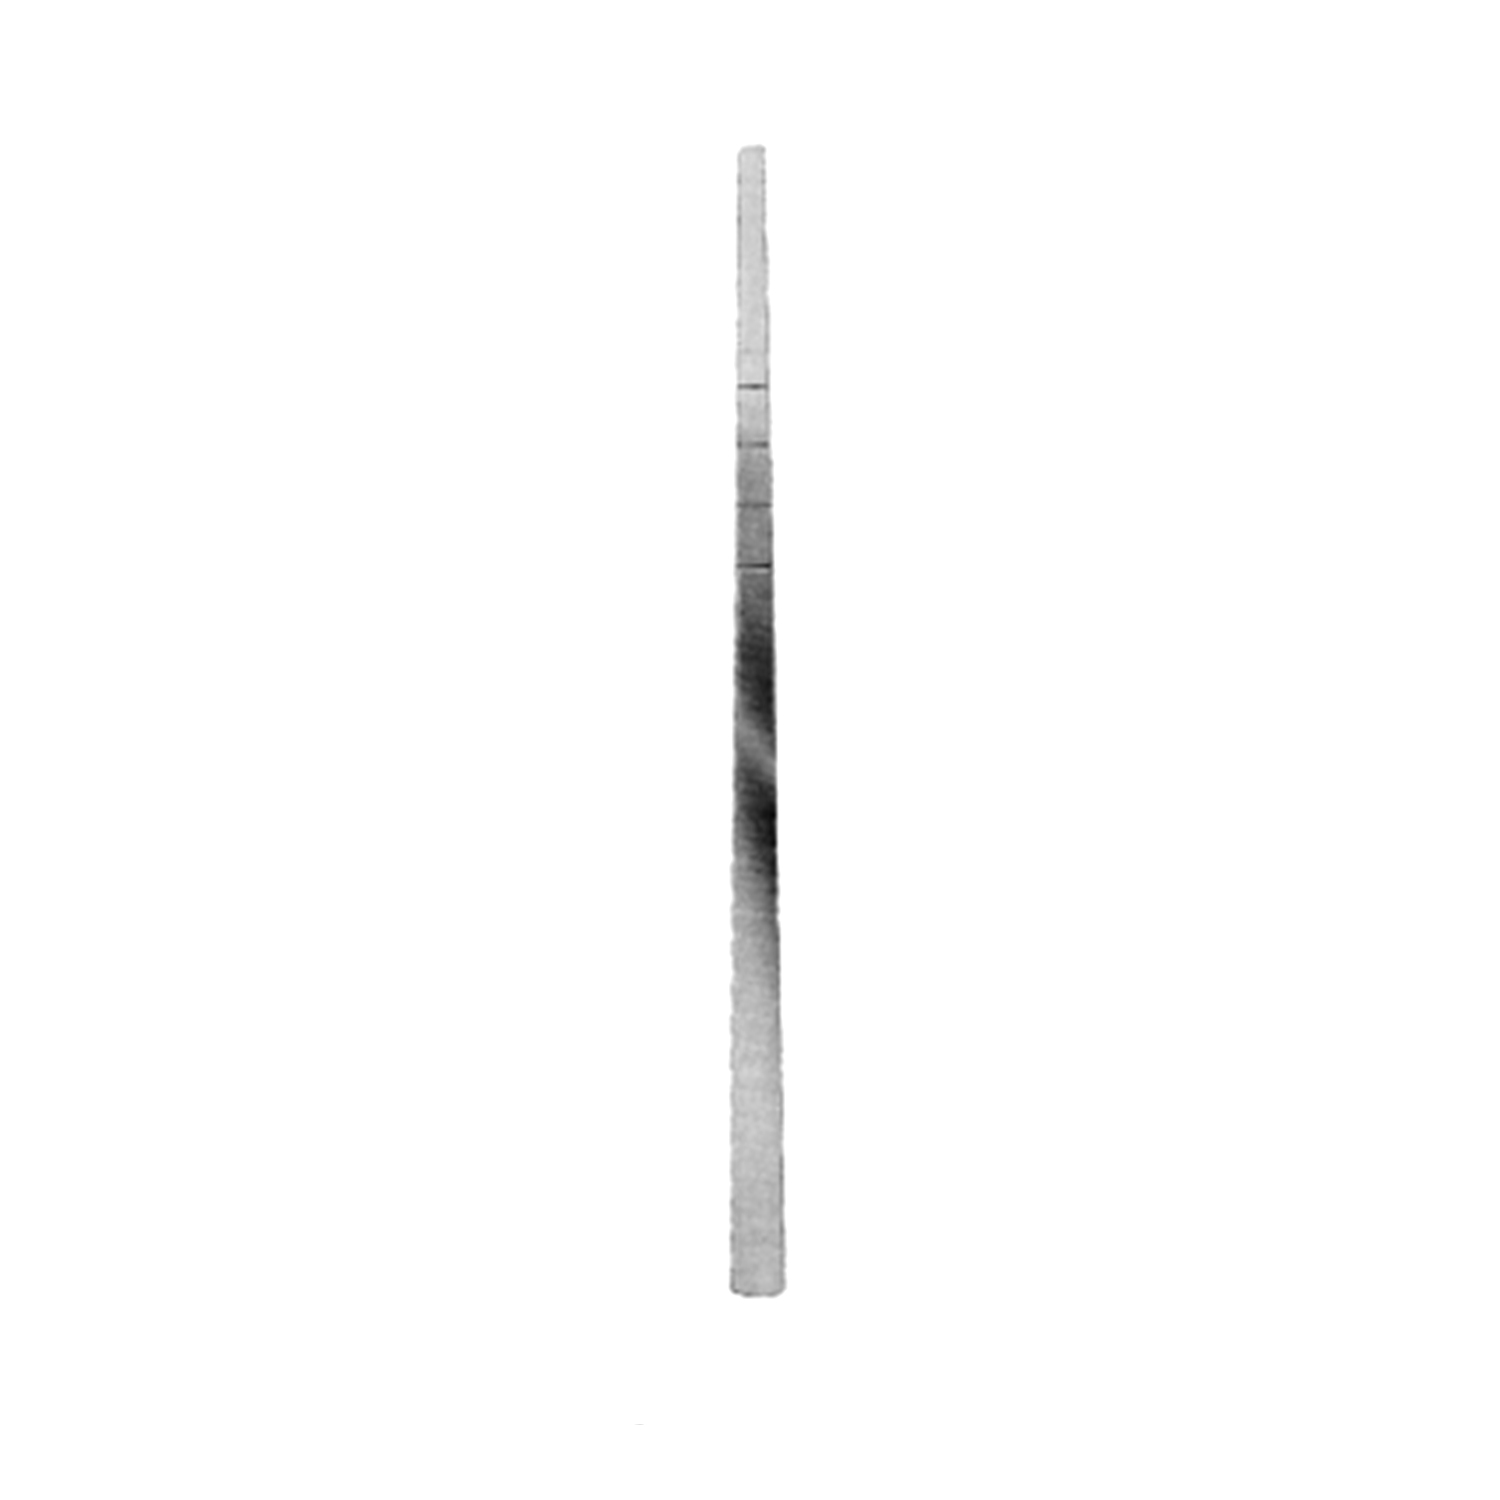 Marina Medical Cottle Chisel - Straight, 4mm: 18cm/7in